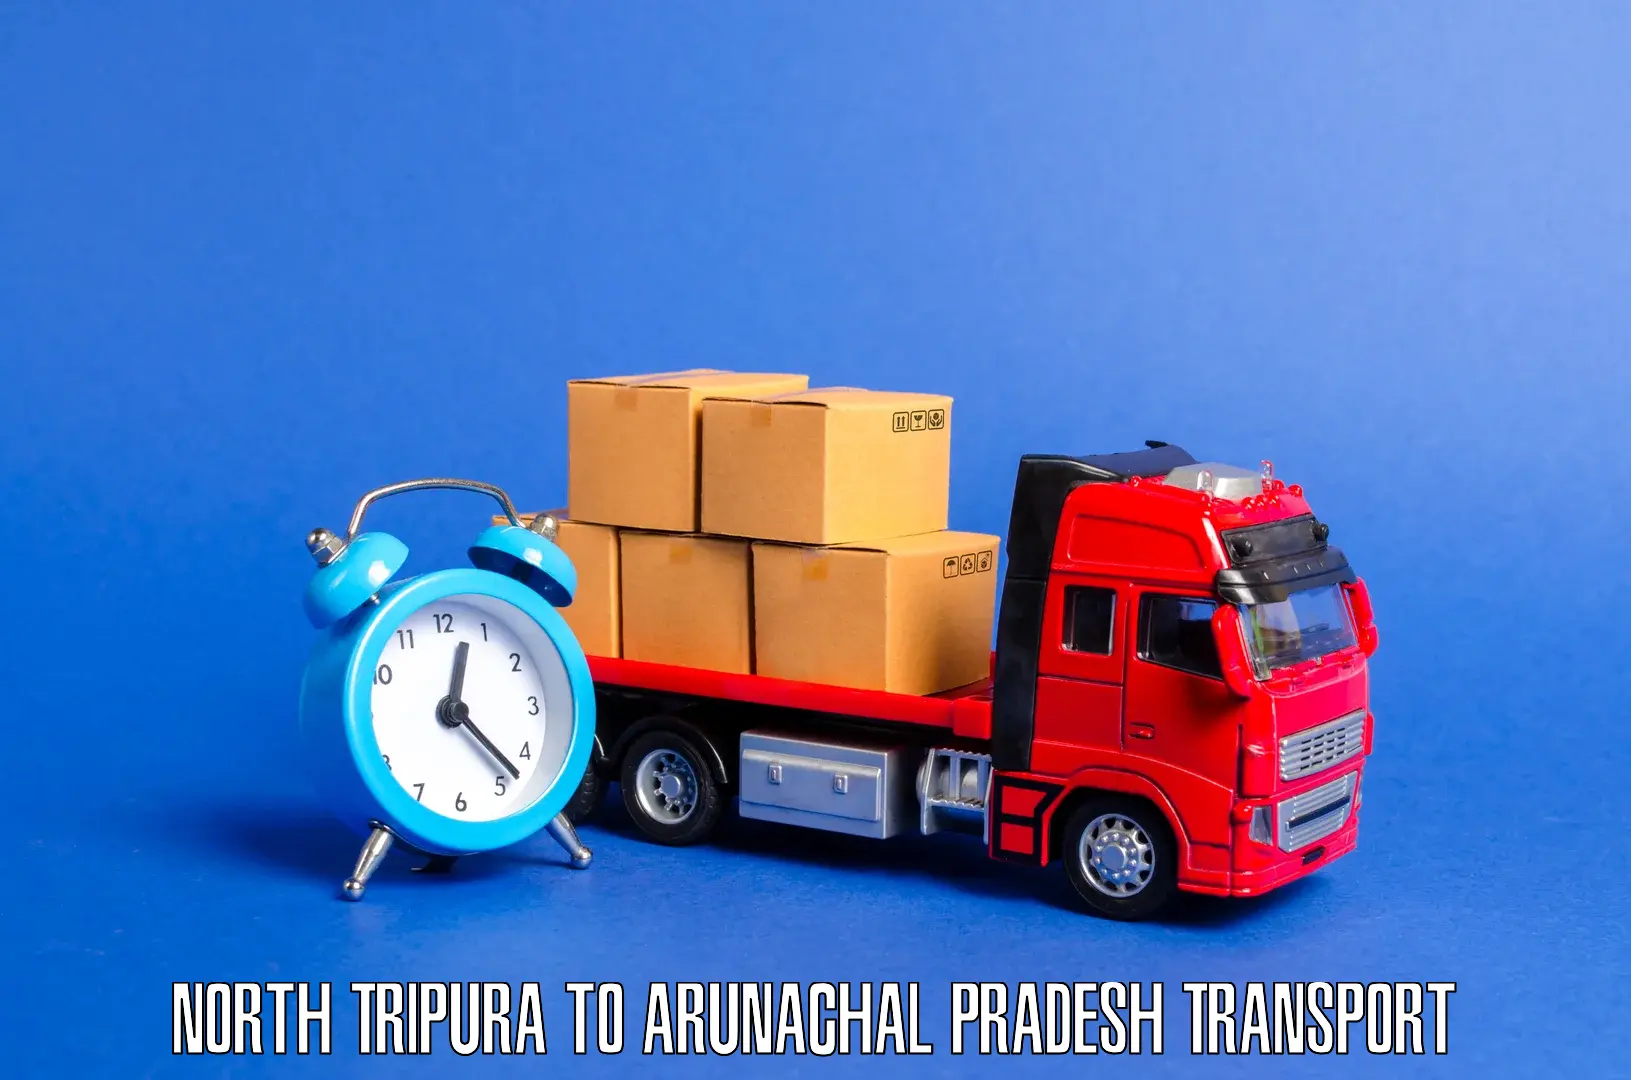 Nationwide transport services in North Tripura to Tirap